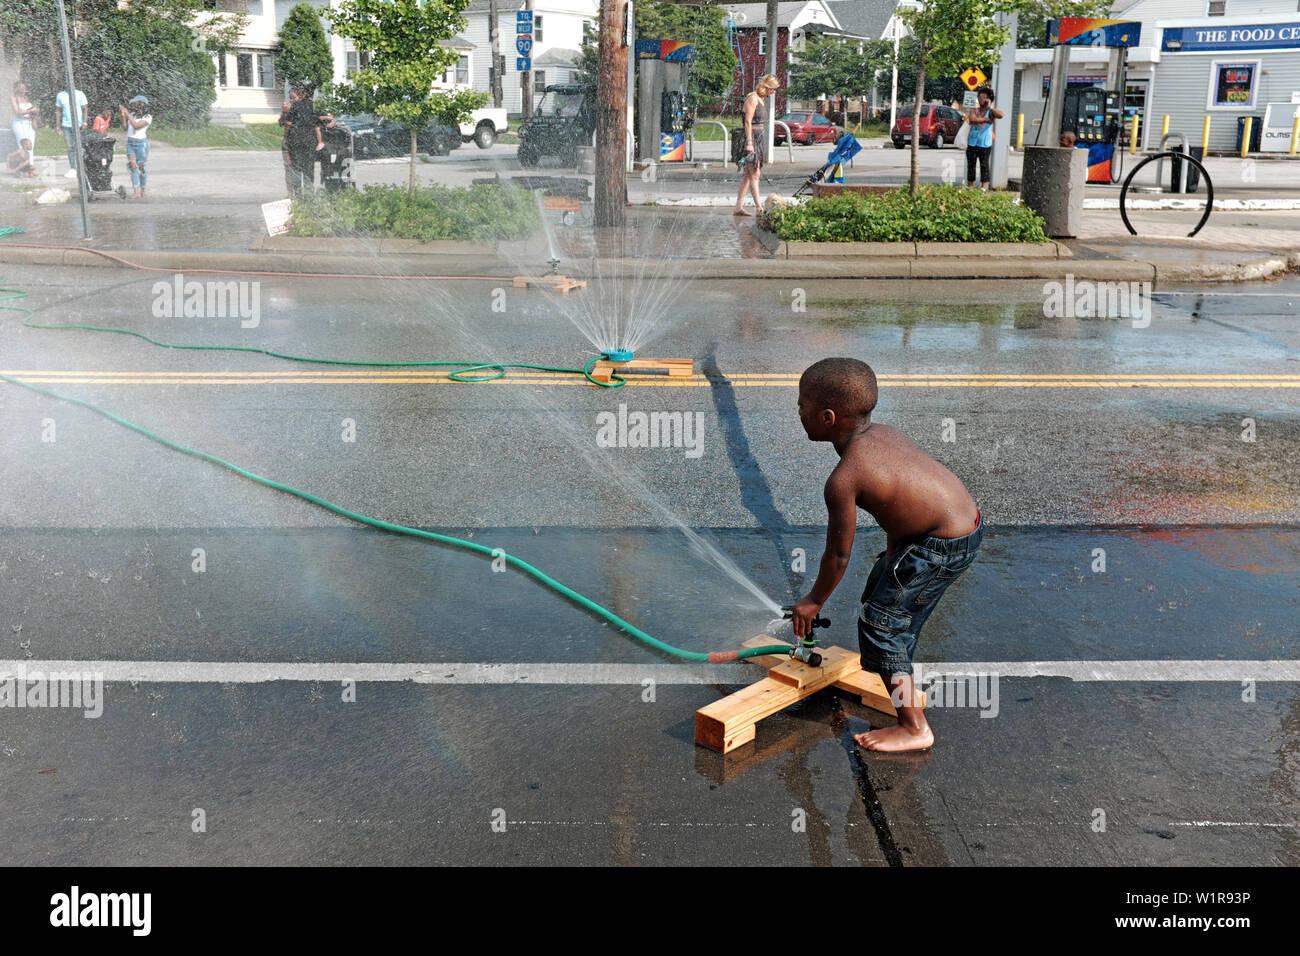 A young black boy directs a sprinkler during a heat wave in the Collinwood neighborhood of Cleveland, Ohio, USA. Stock Photo